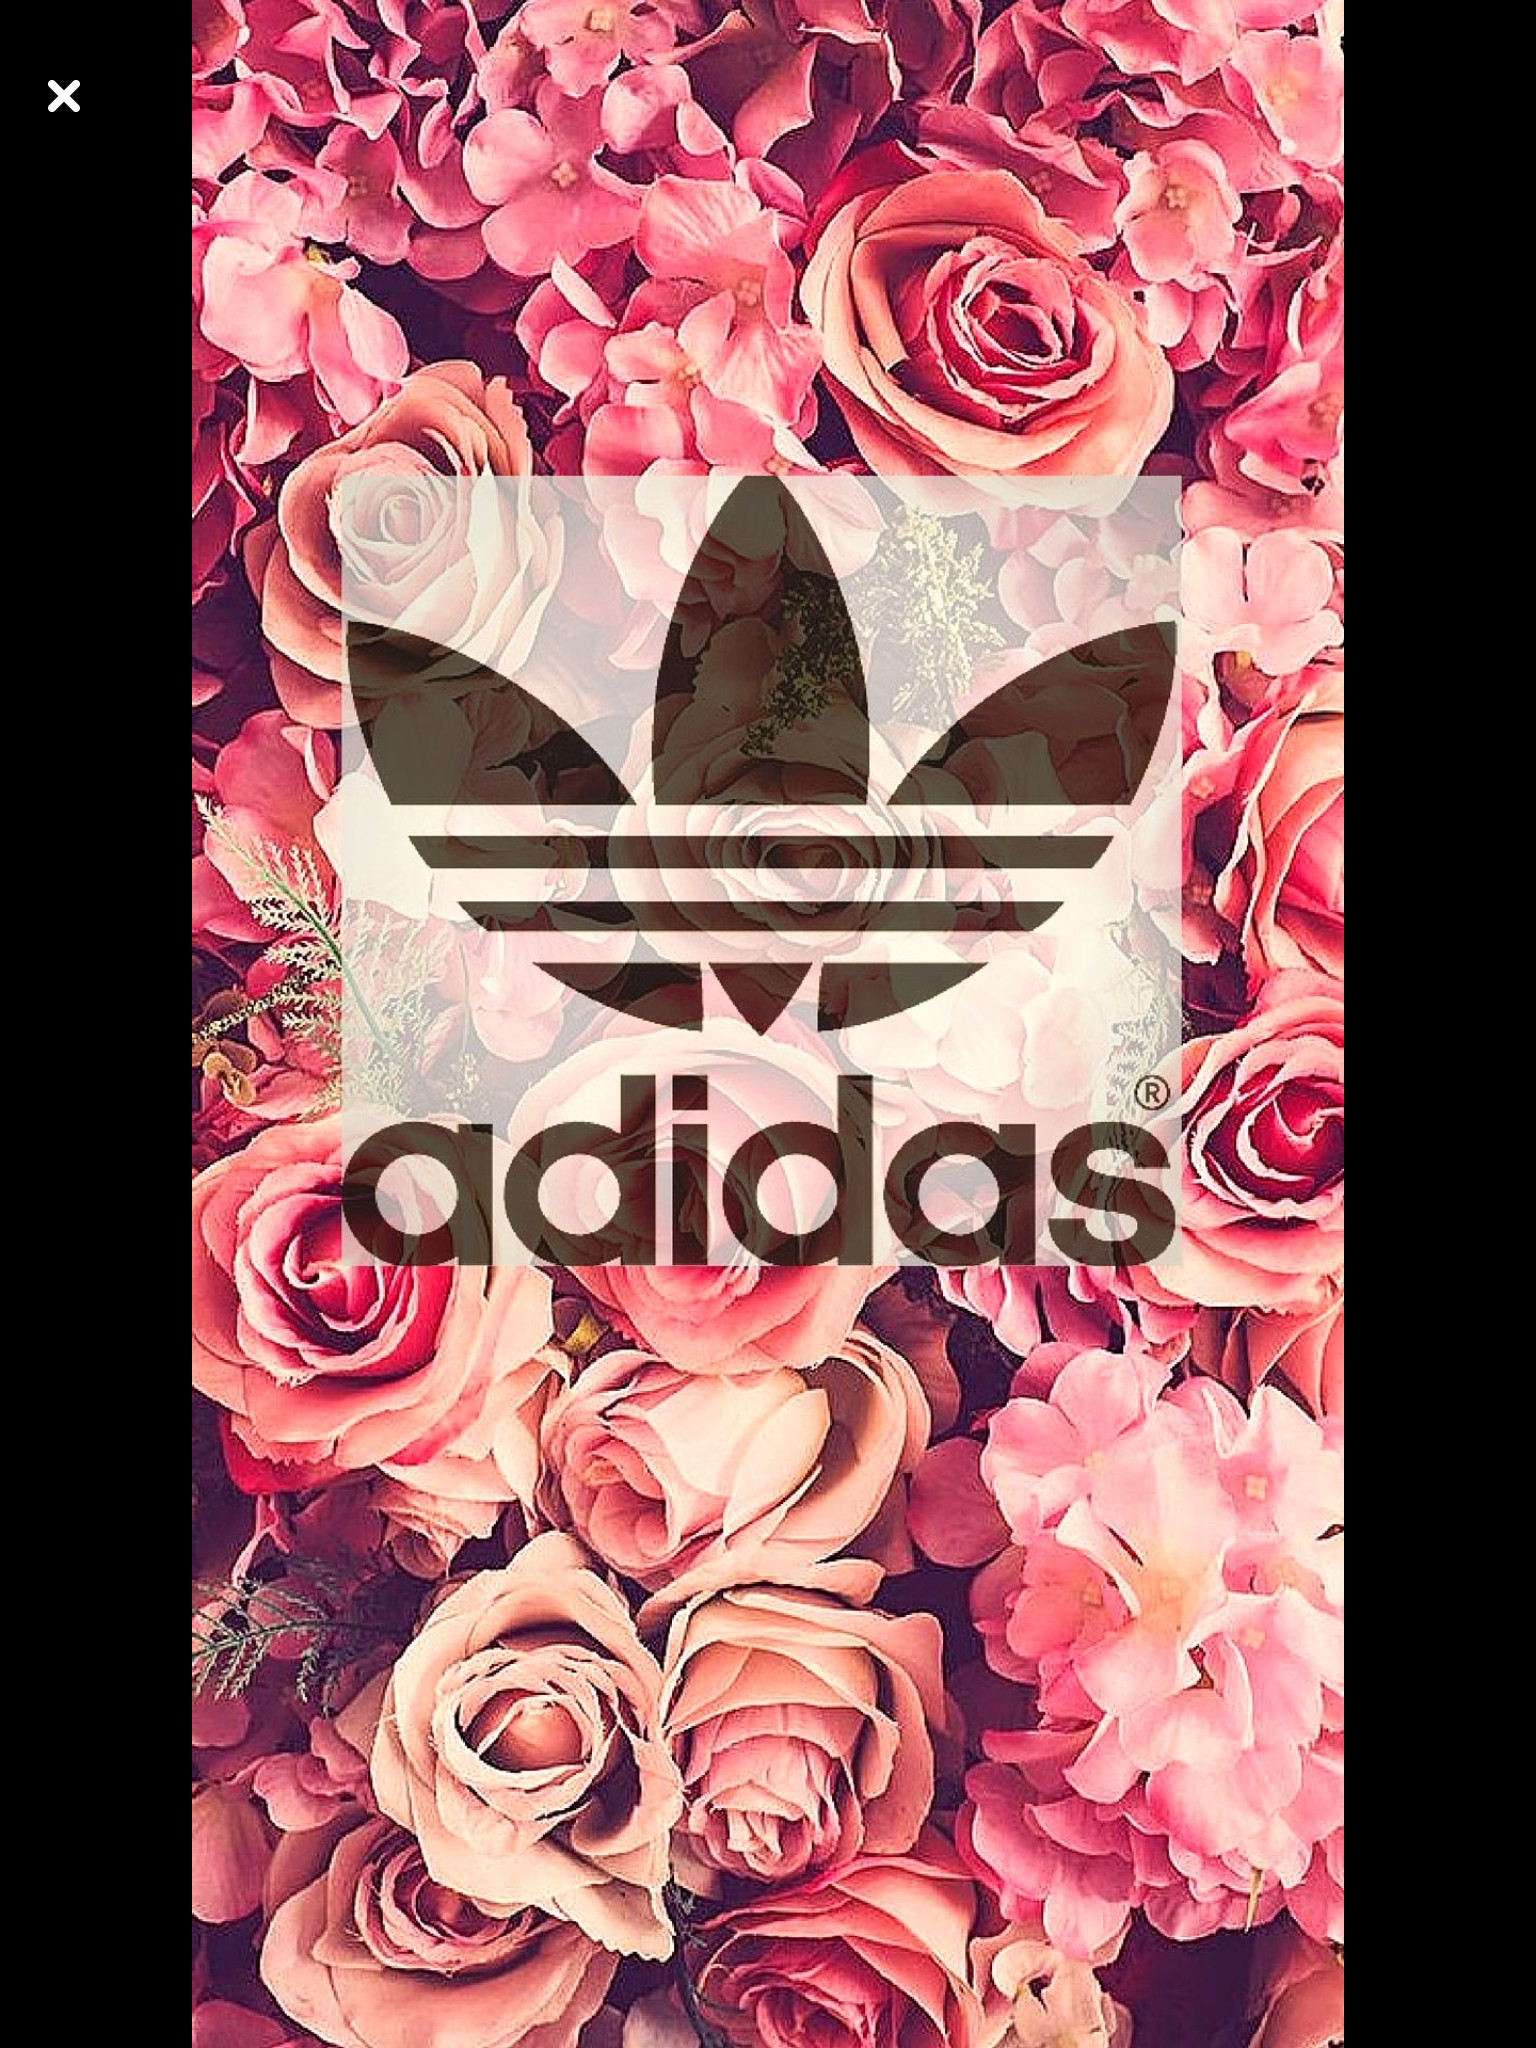 1536x2048 Cute wallpapers wallpaper backgrounds wallpaper for phone adidas  backgrounds cute ipad wallpaper nike floral png 